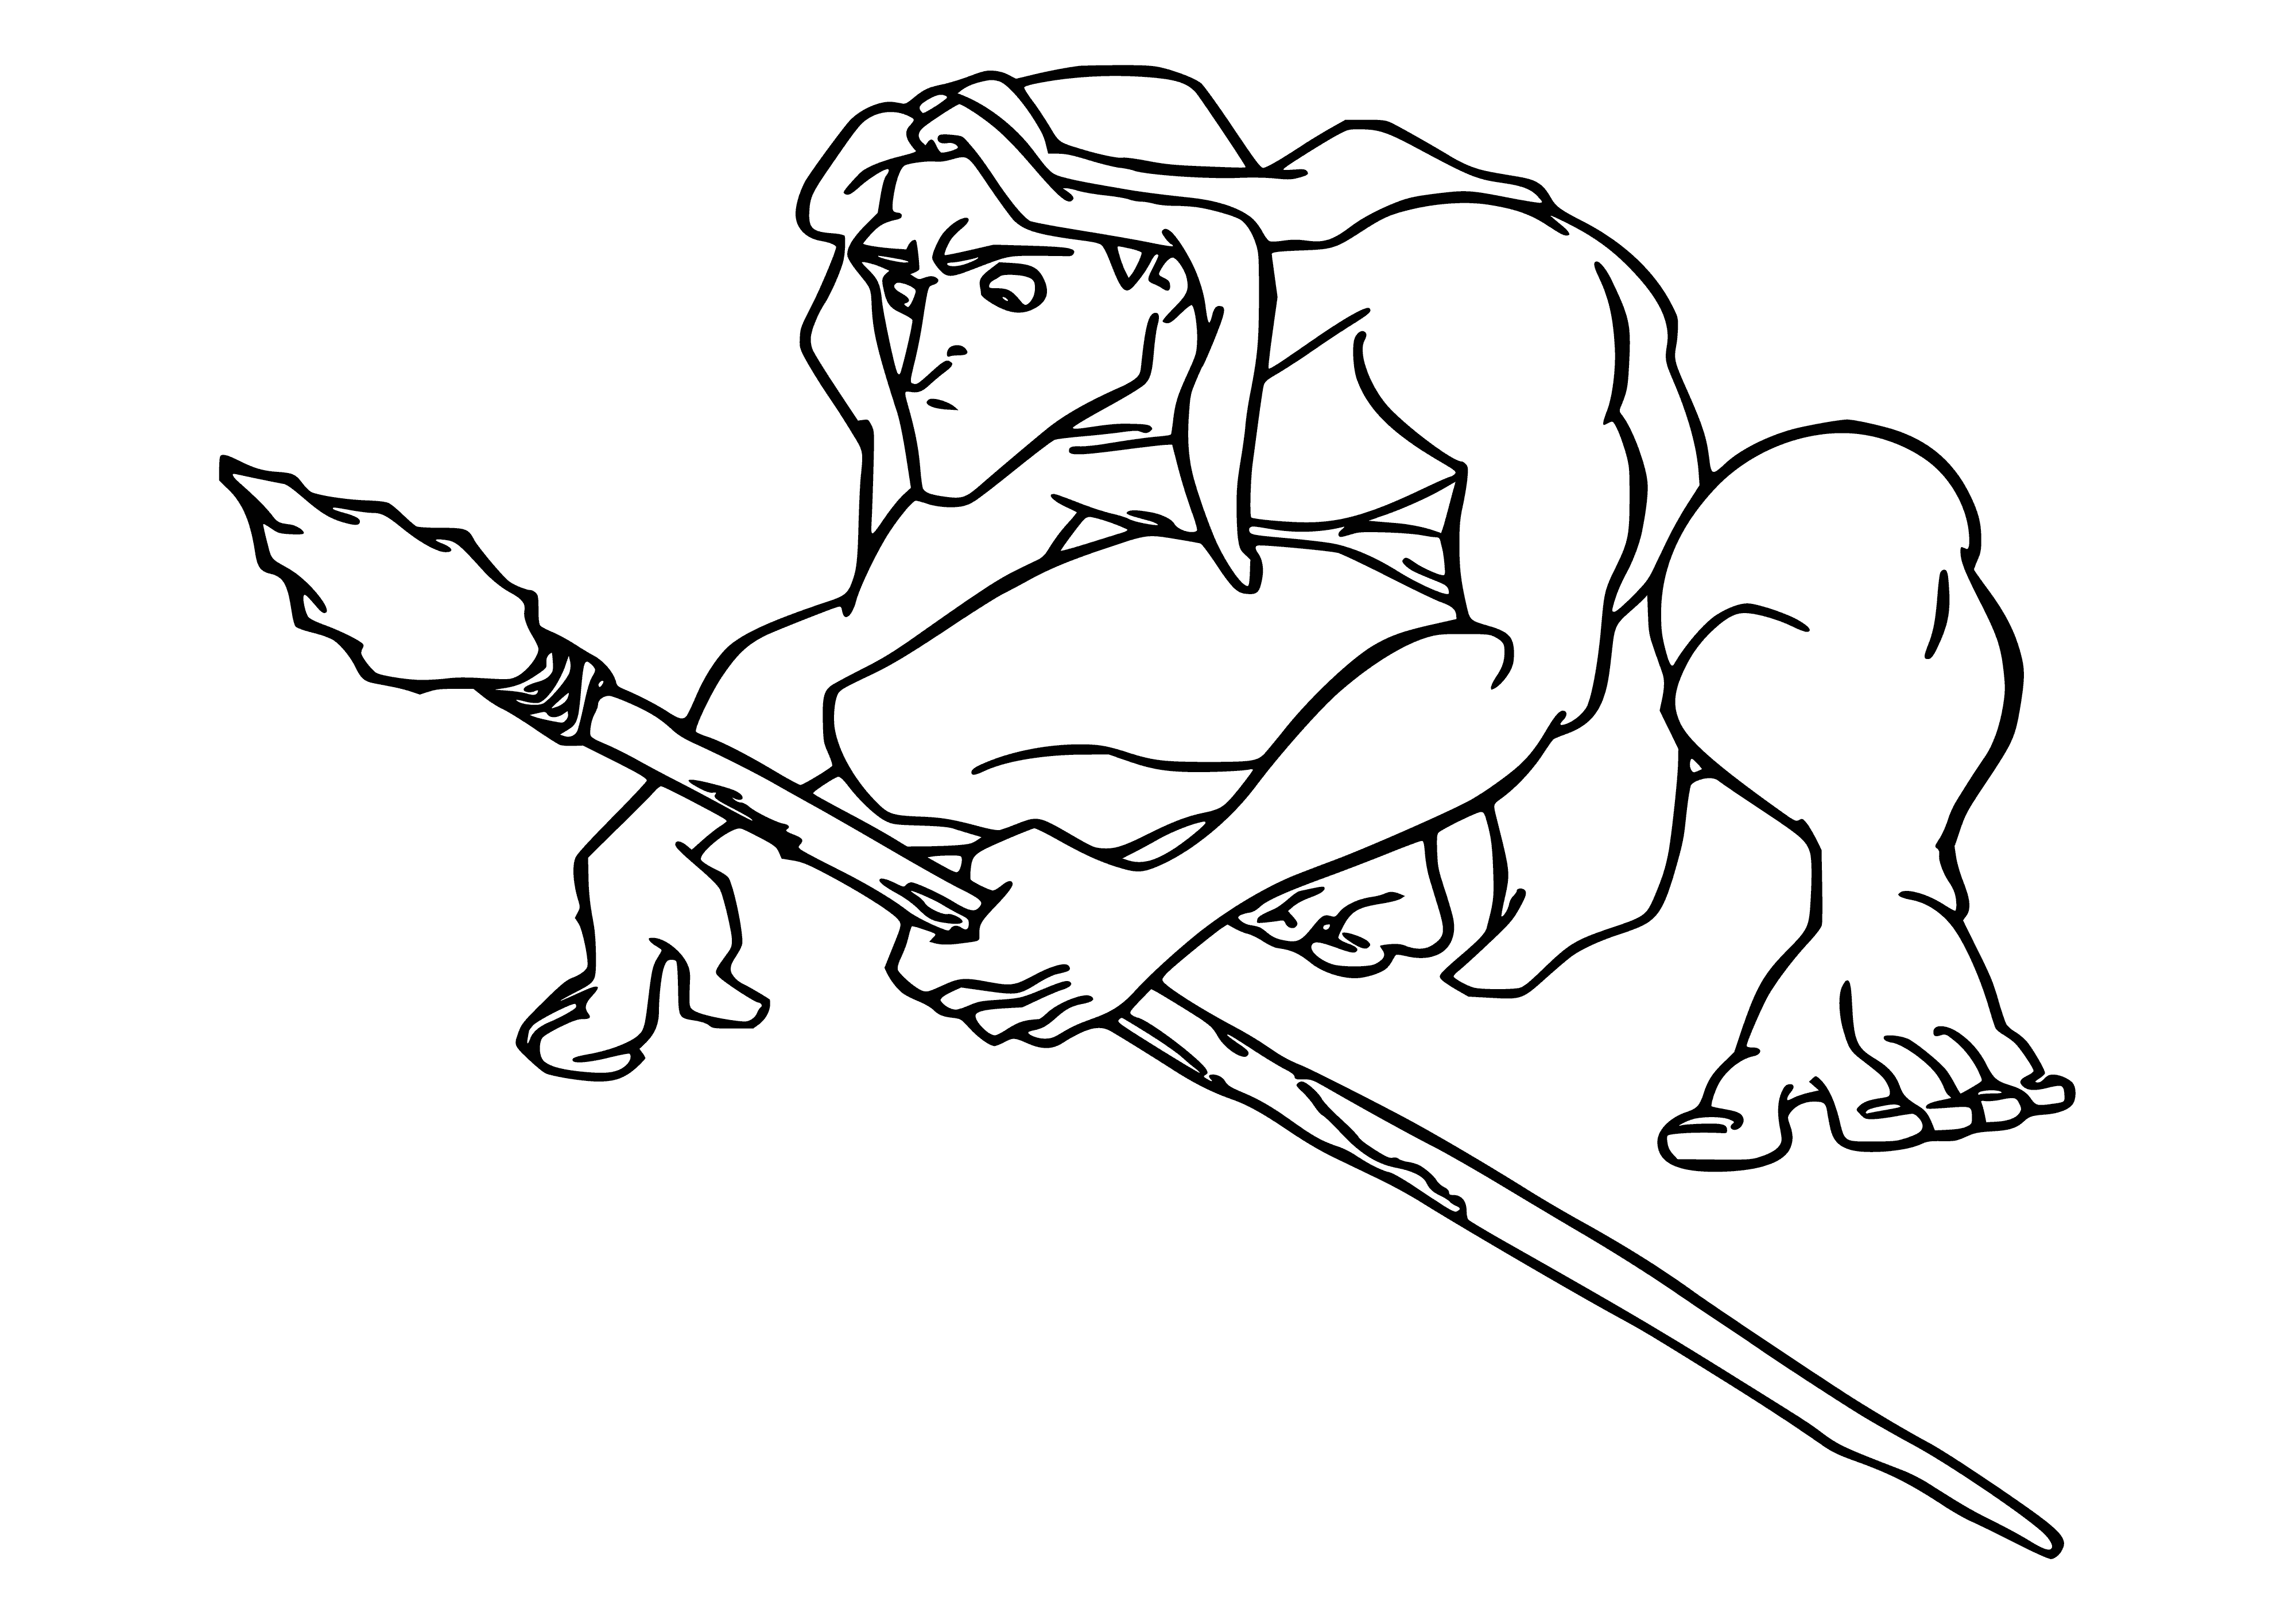 coloring page: A fierce-eyed man with a spear and knife stands upon a branch, strong and shirtless. His long hair flows as he stares ahead.